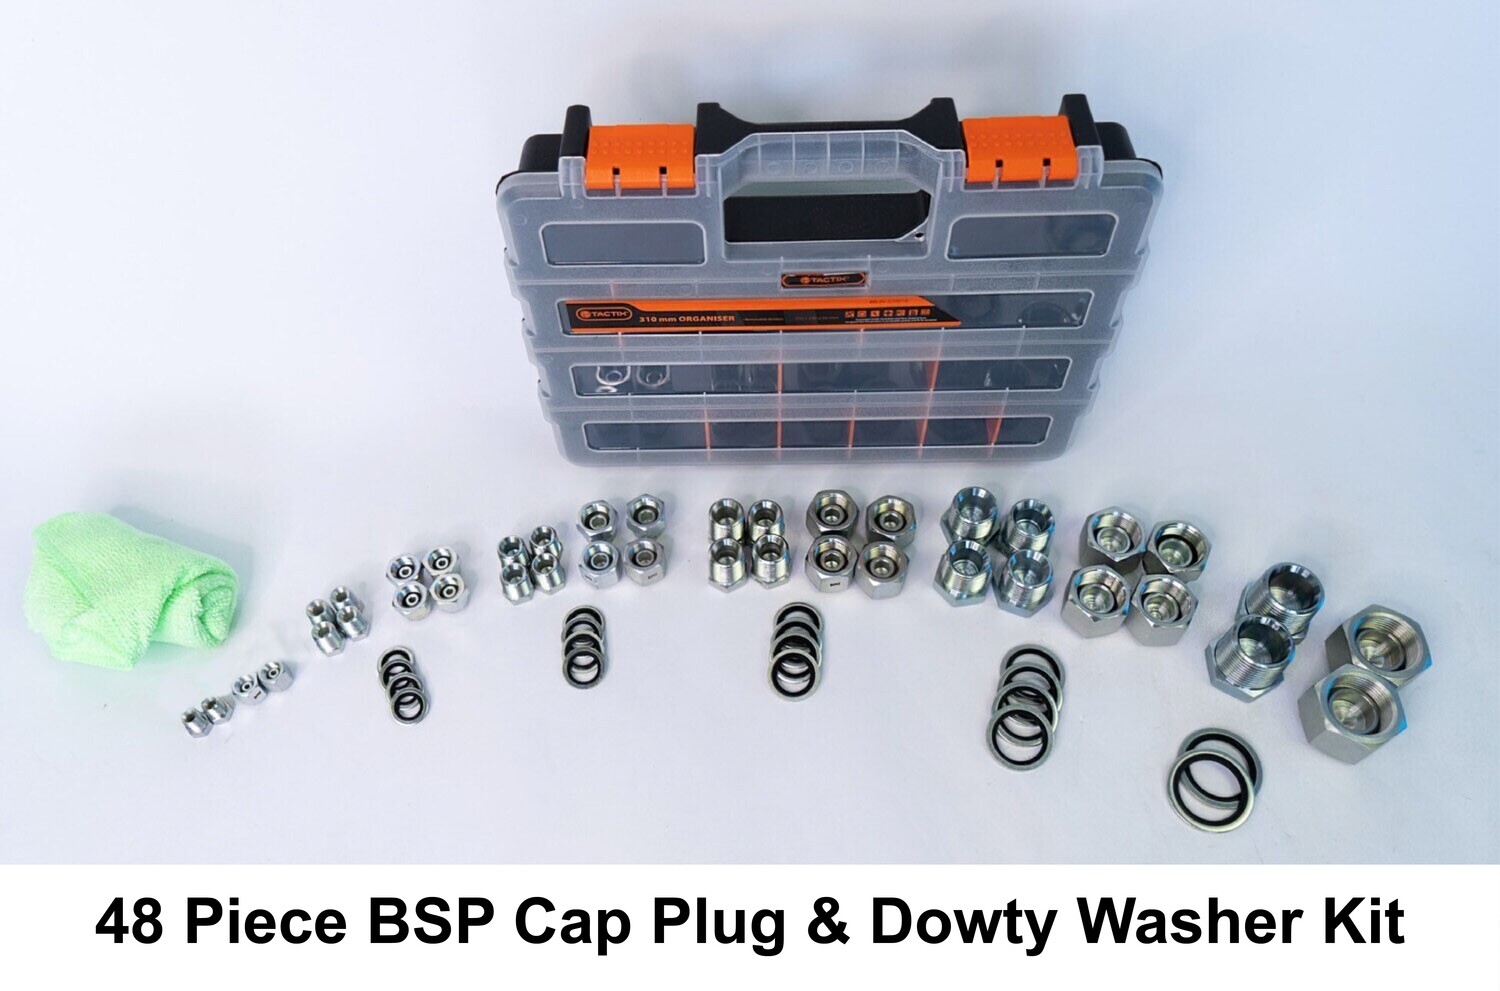 BSP Plug, Cap & Dowty Kit 48 pc in Strong Plastic Case